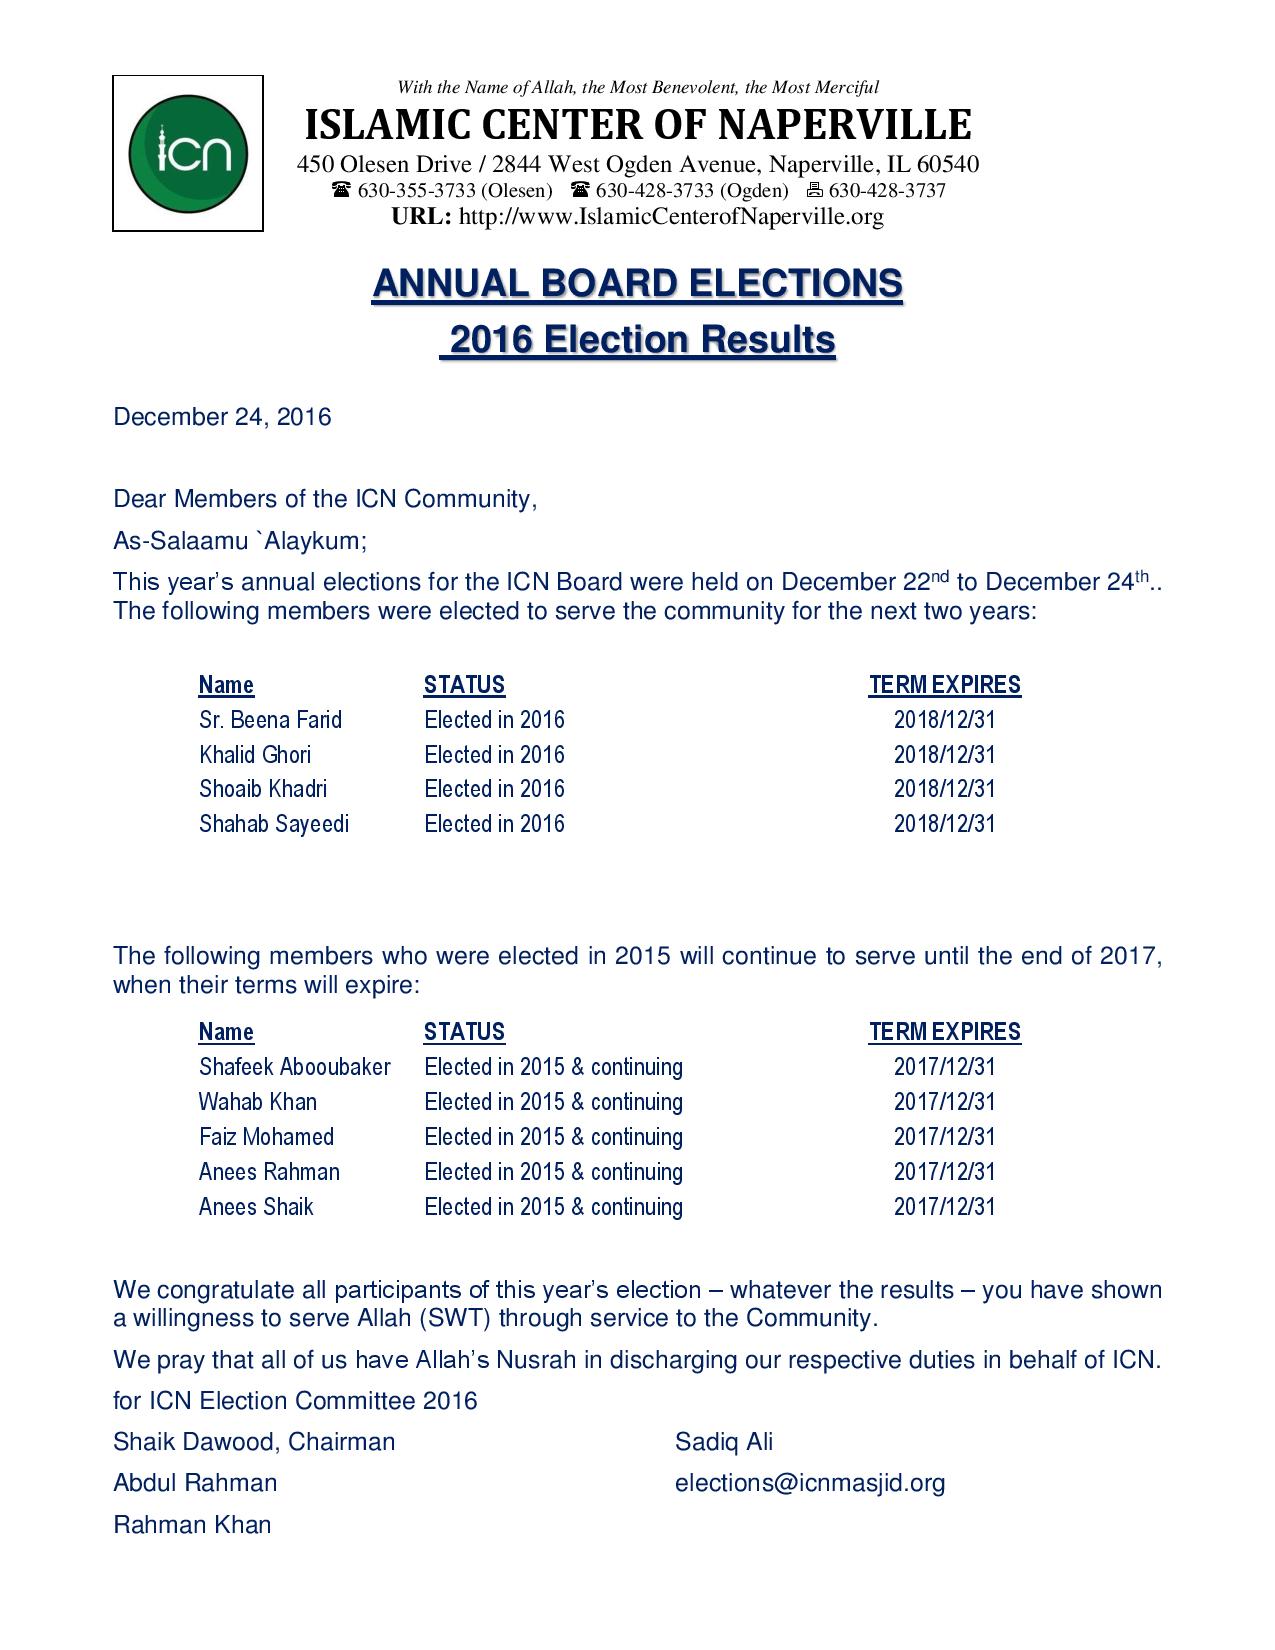 board-elections-results-2016